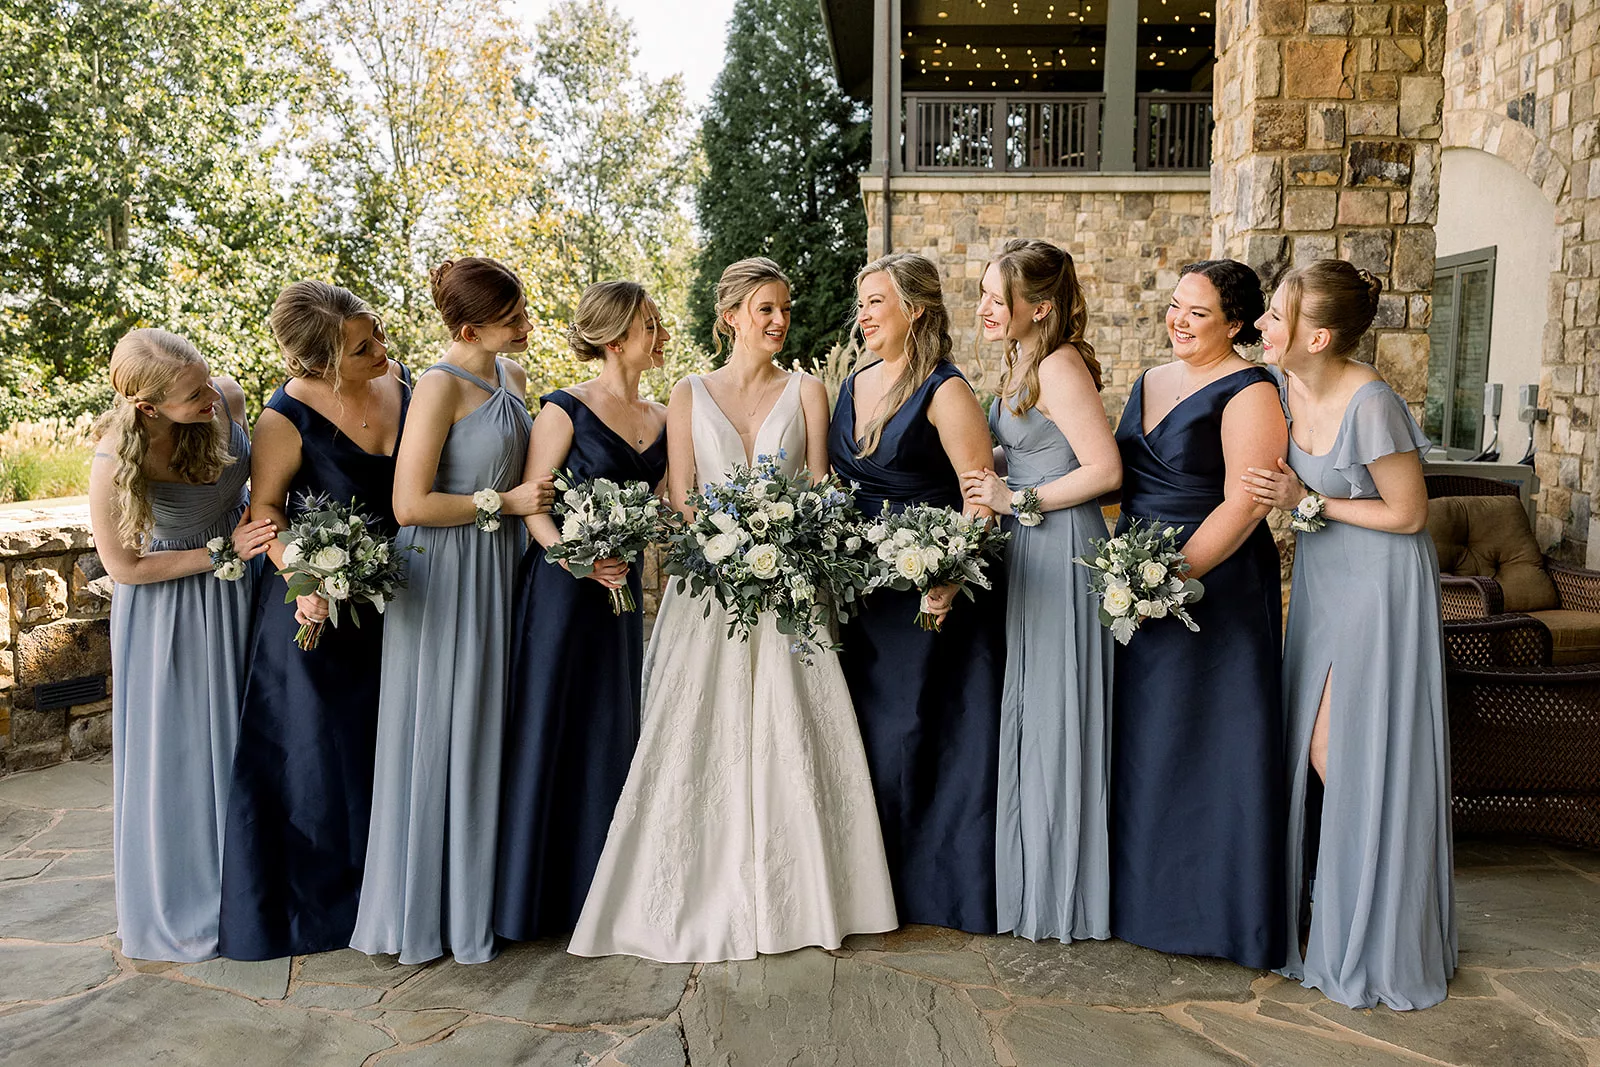 A bride laughs with her bridal party on a stone patio